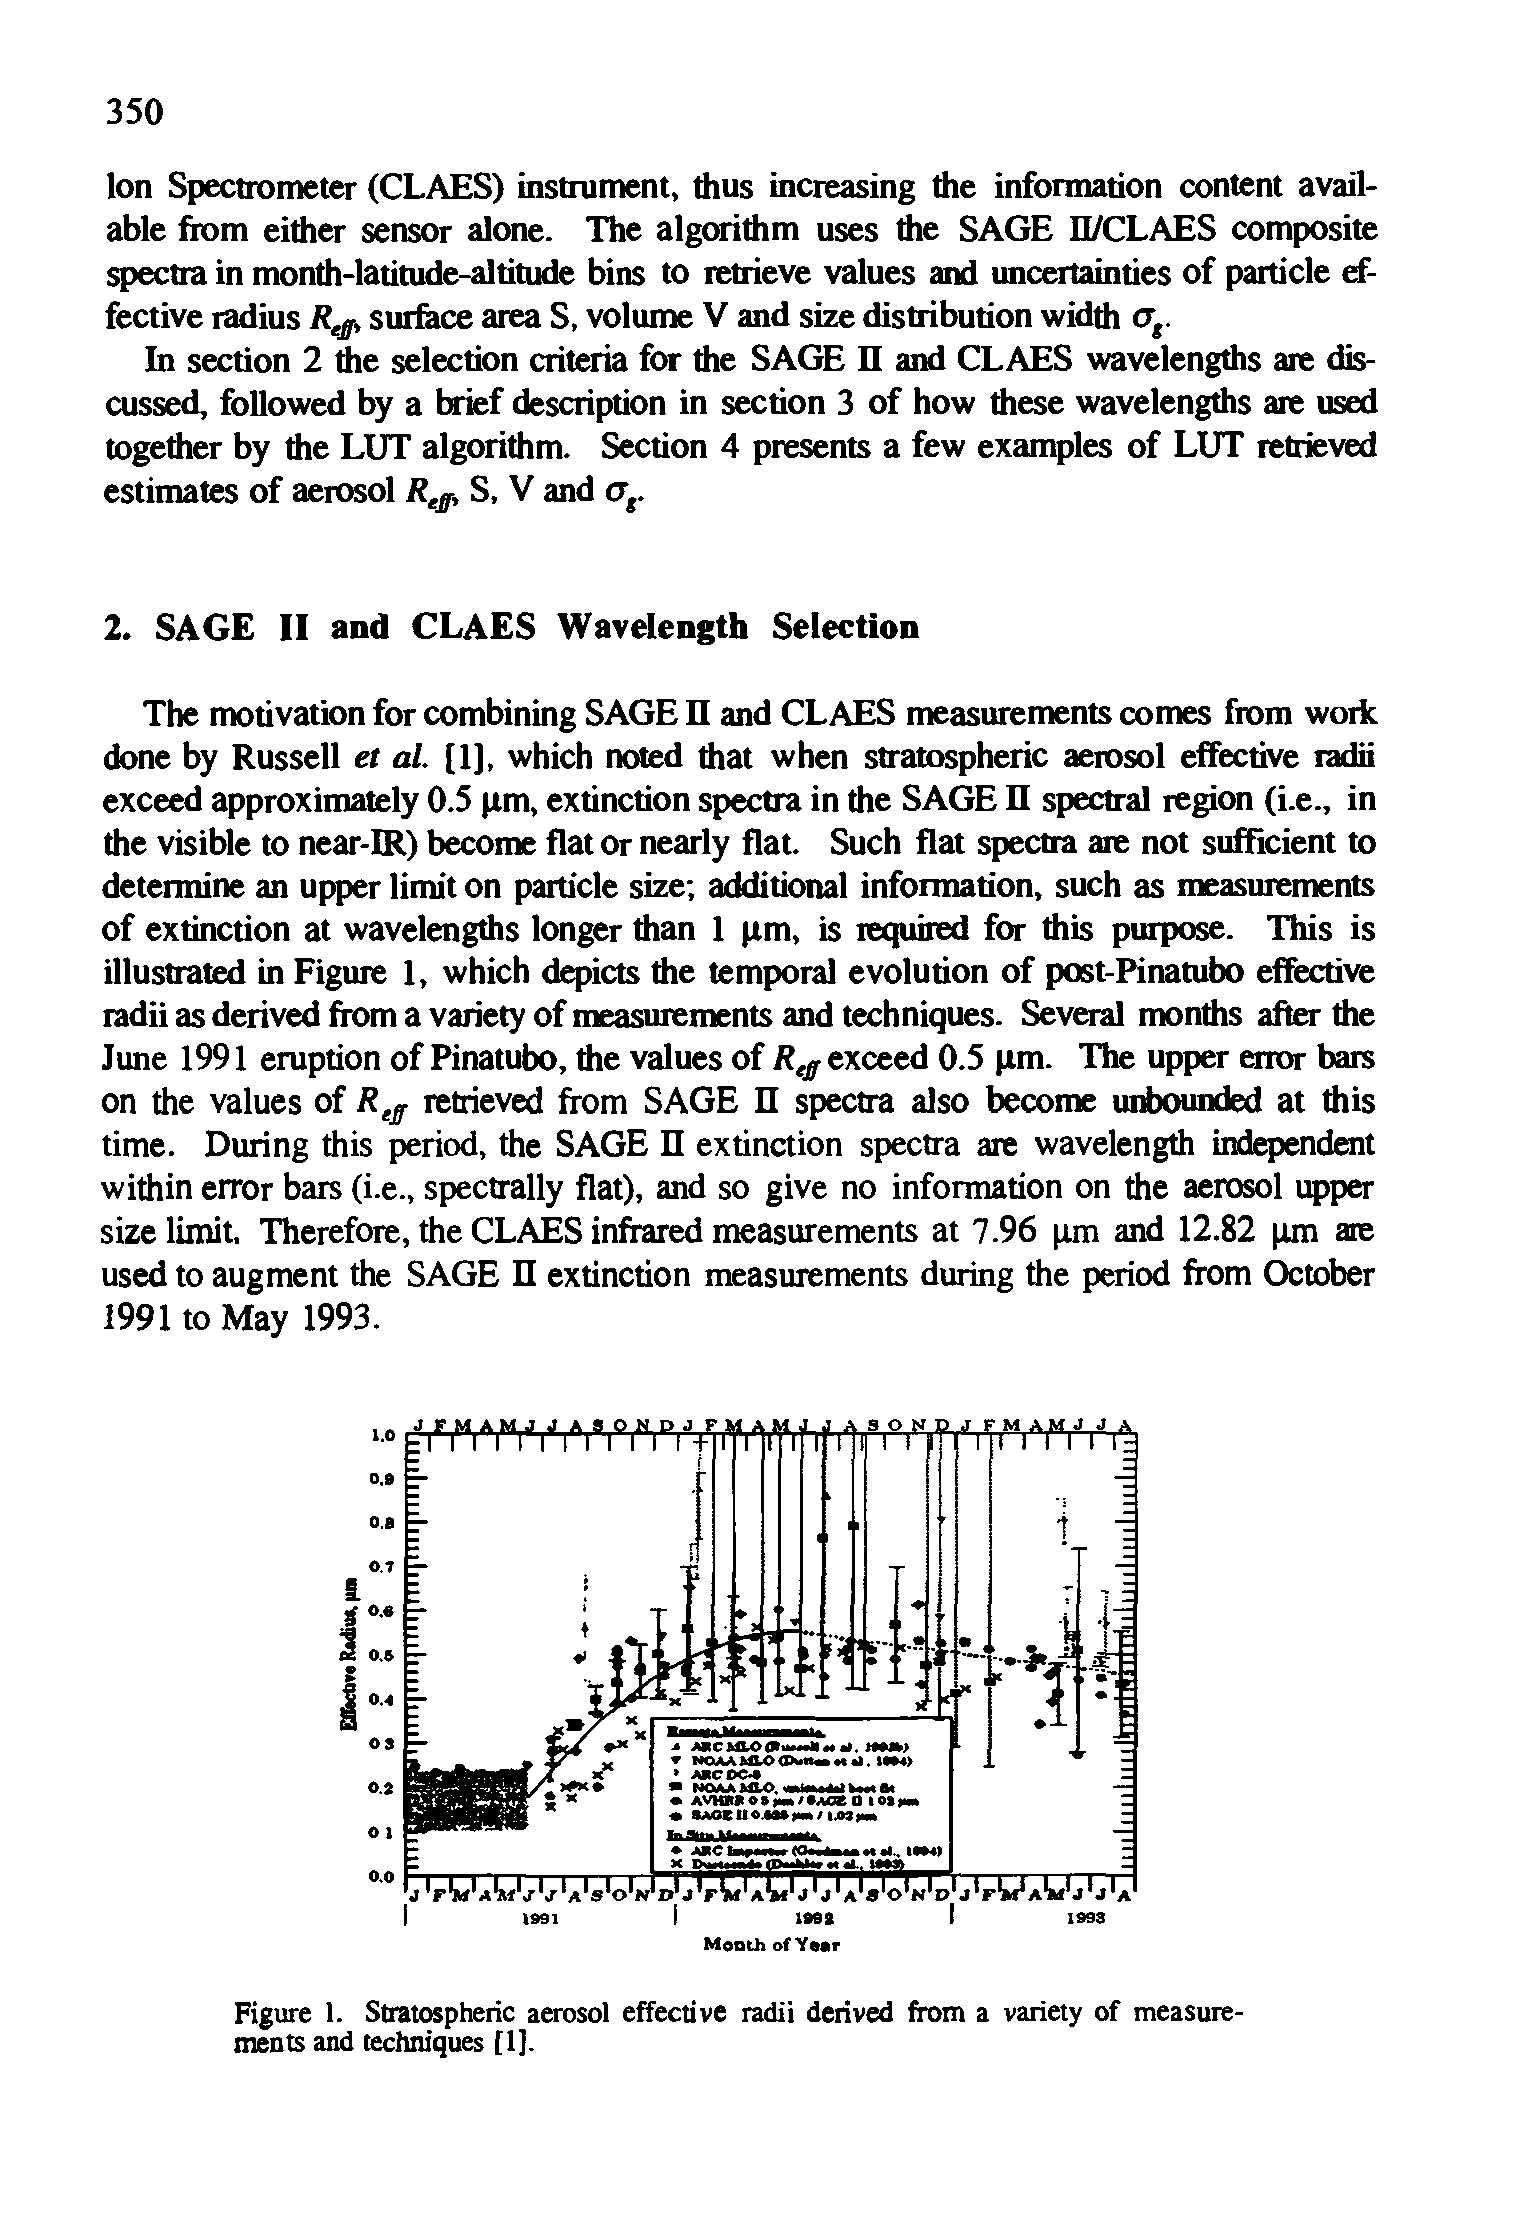 Figure 1. Stratospheric aerosol effective radii derived from a variety of measurements and techniques [1].